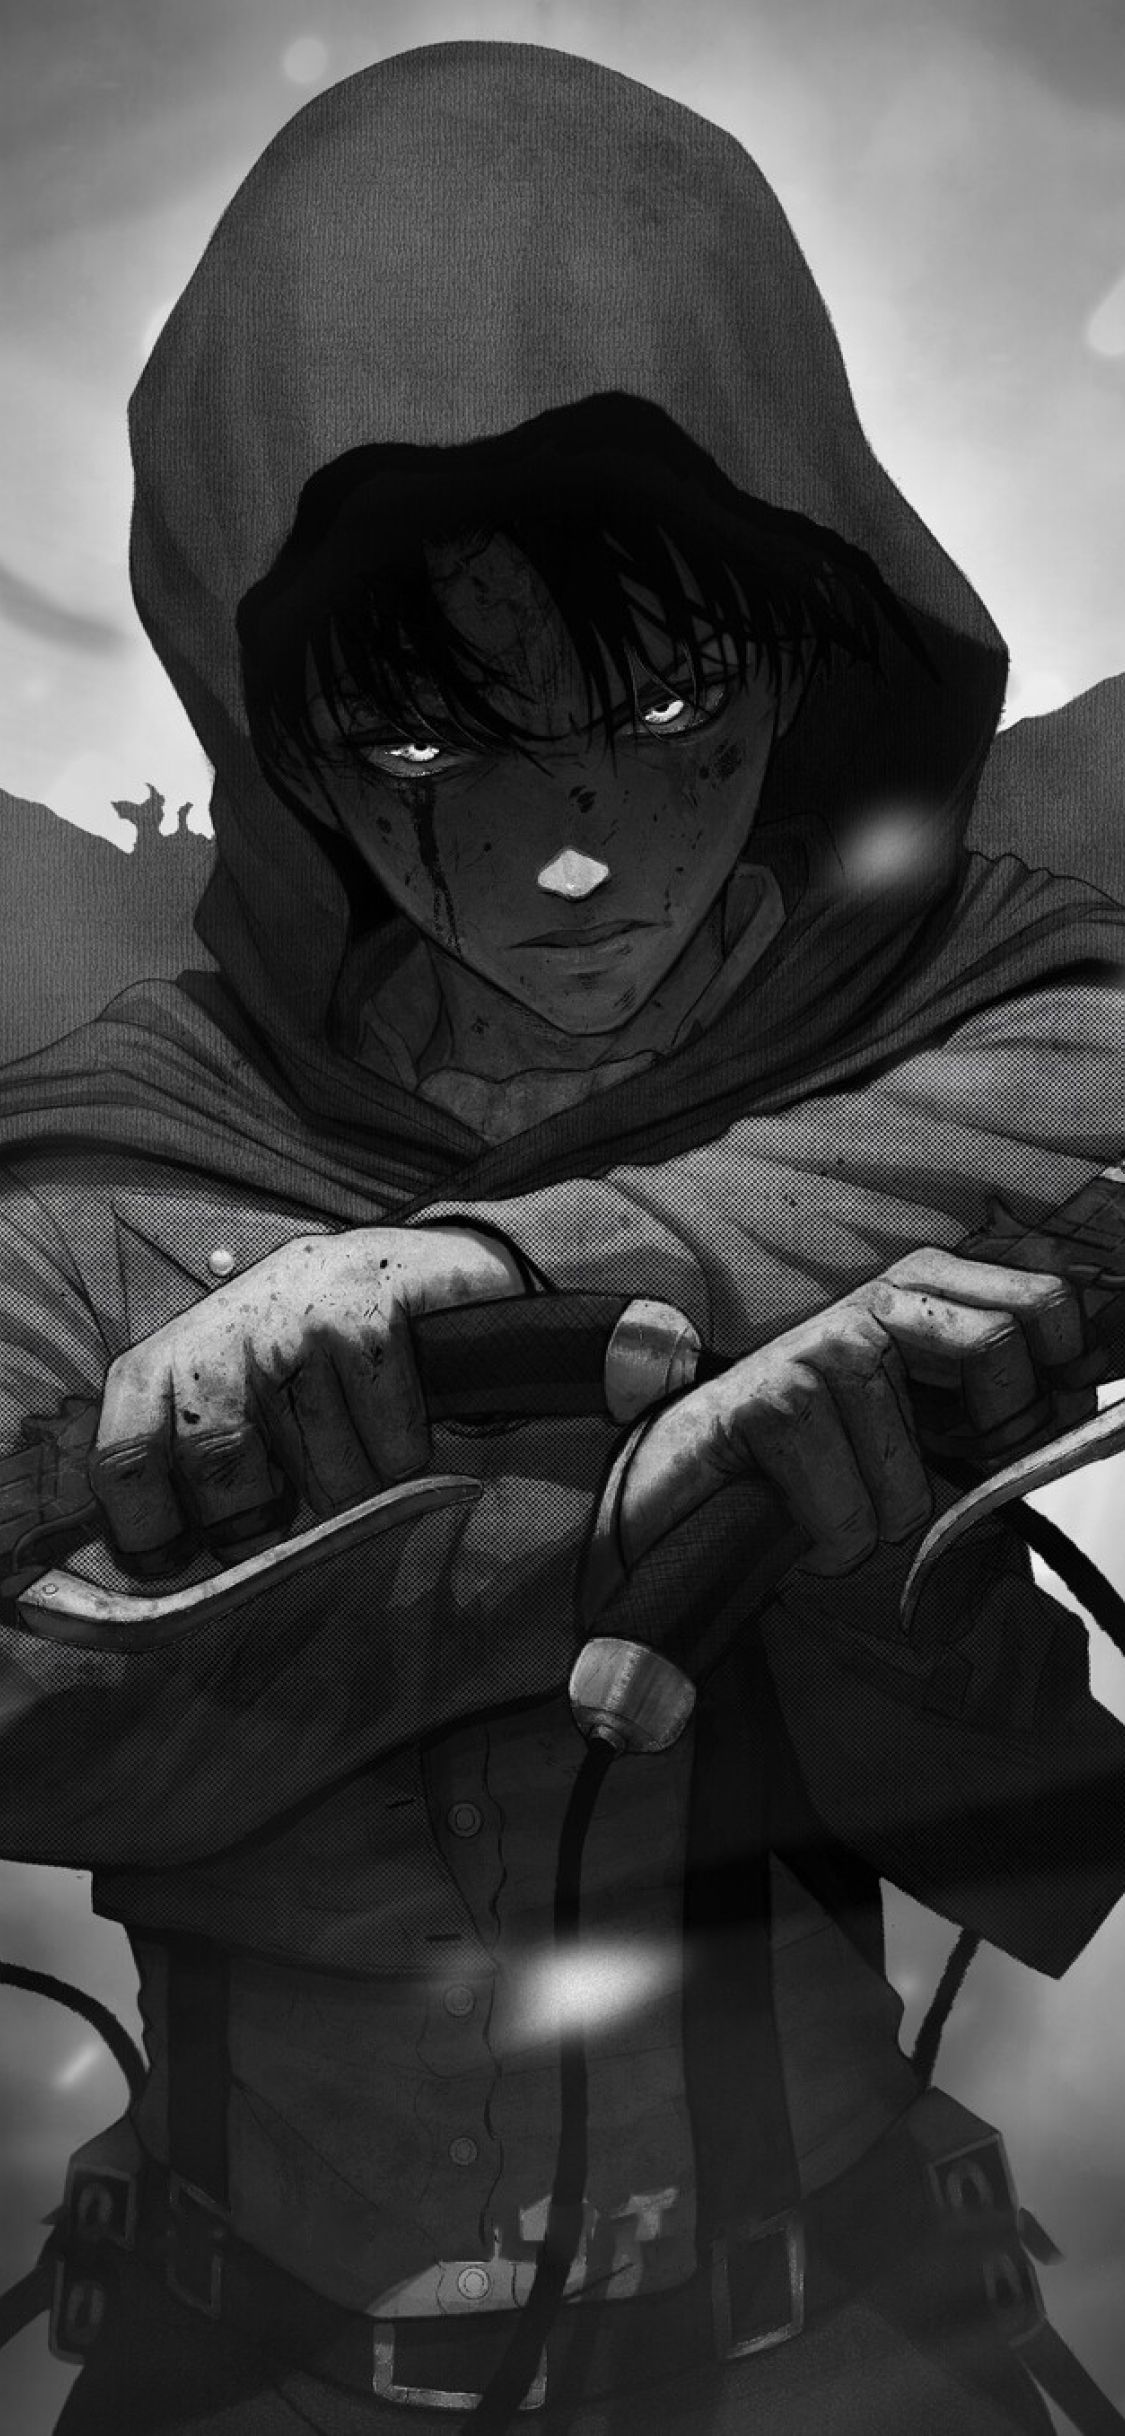 X levi ackerman monochrome iphone xsiphone iphone x wallpaper hd anime k wallpapers images photos and background